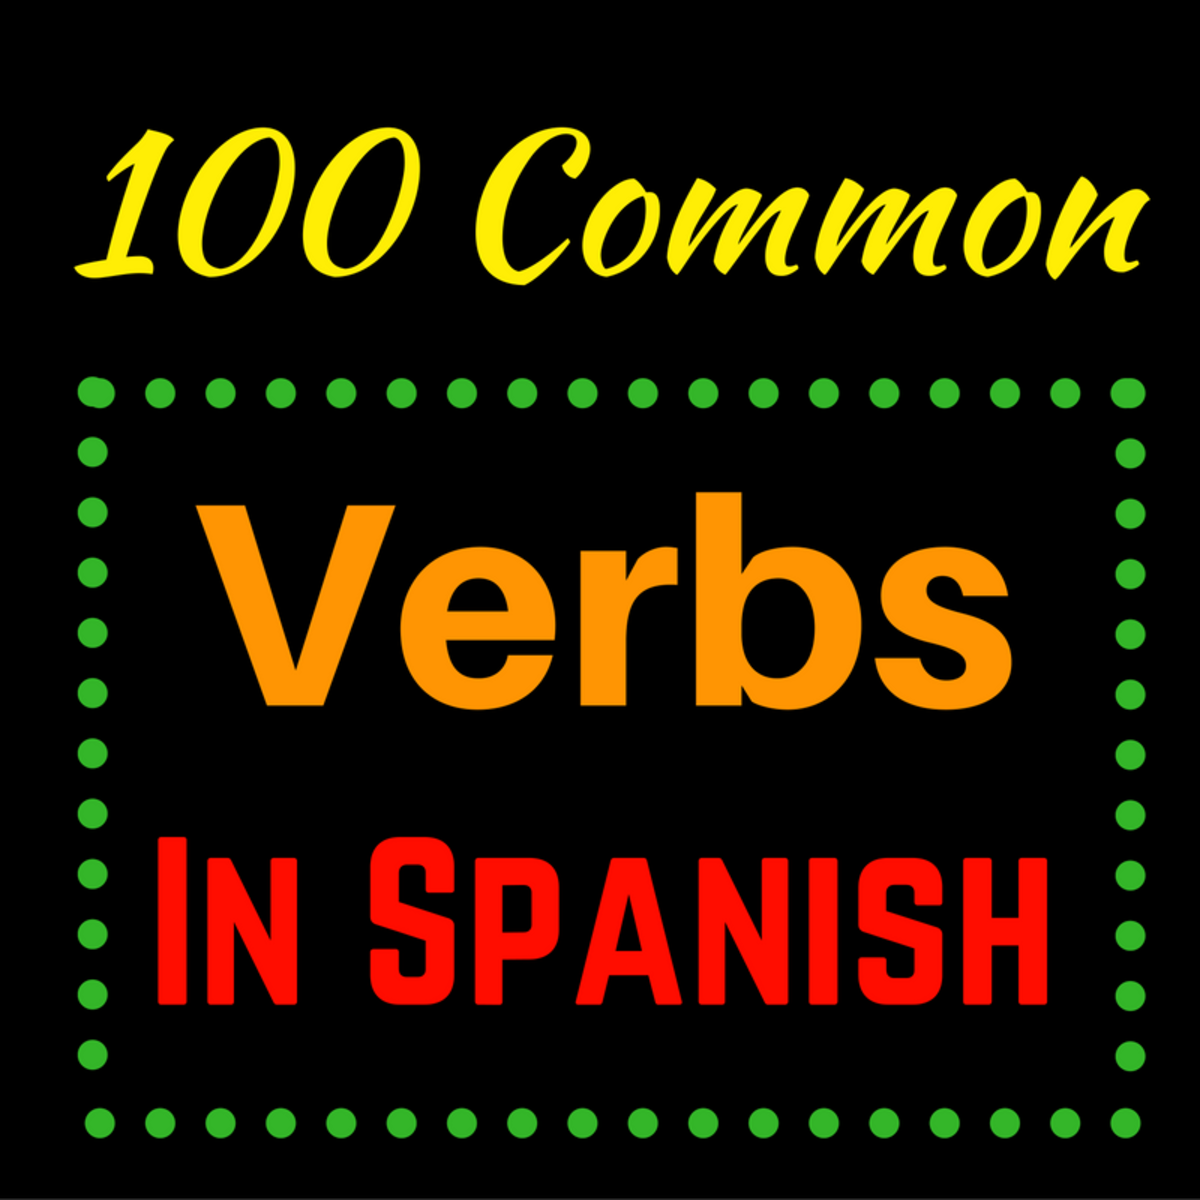 learn-spanish-100-most-common-verbs-and-expressions-hubpages